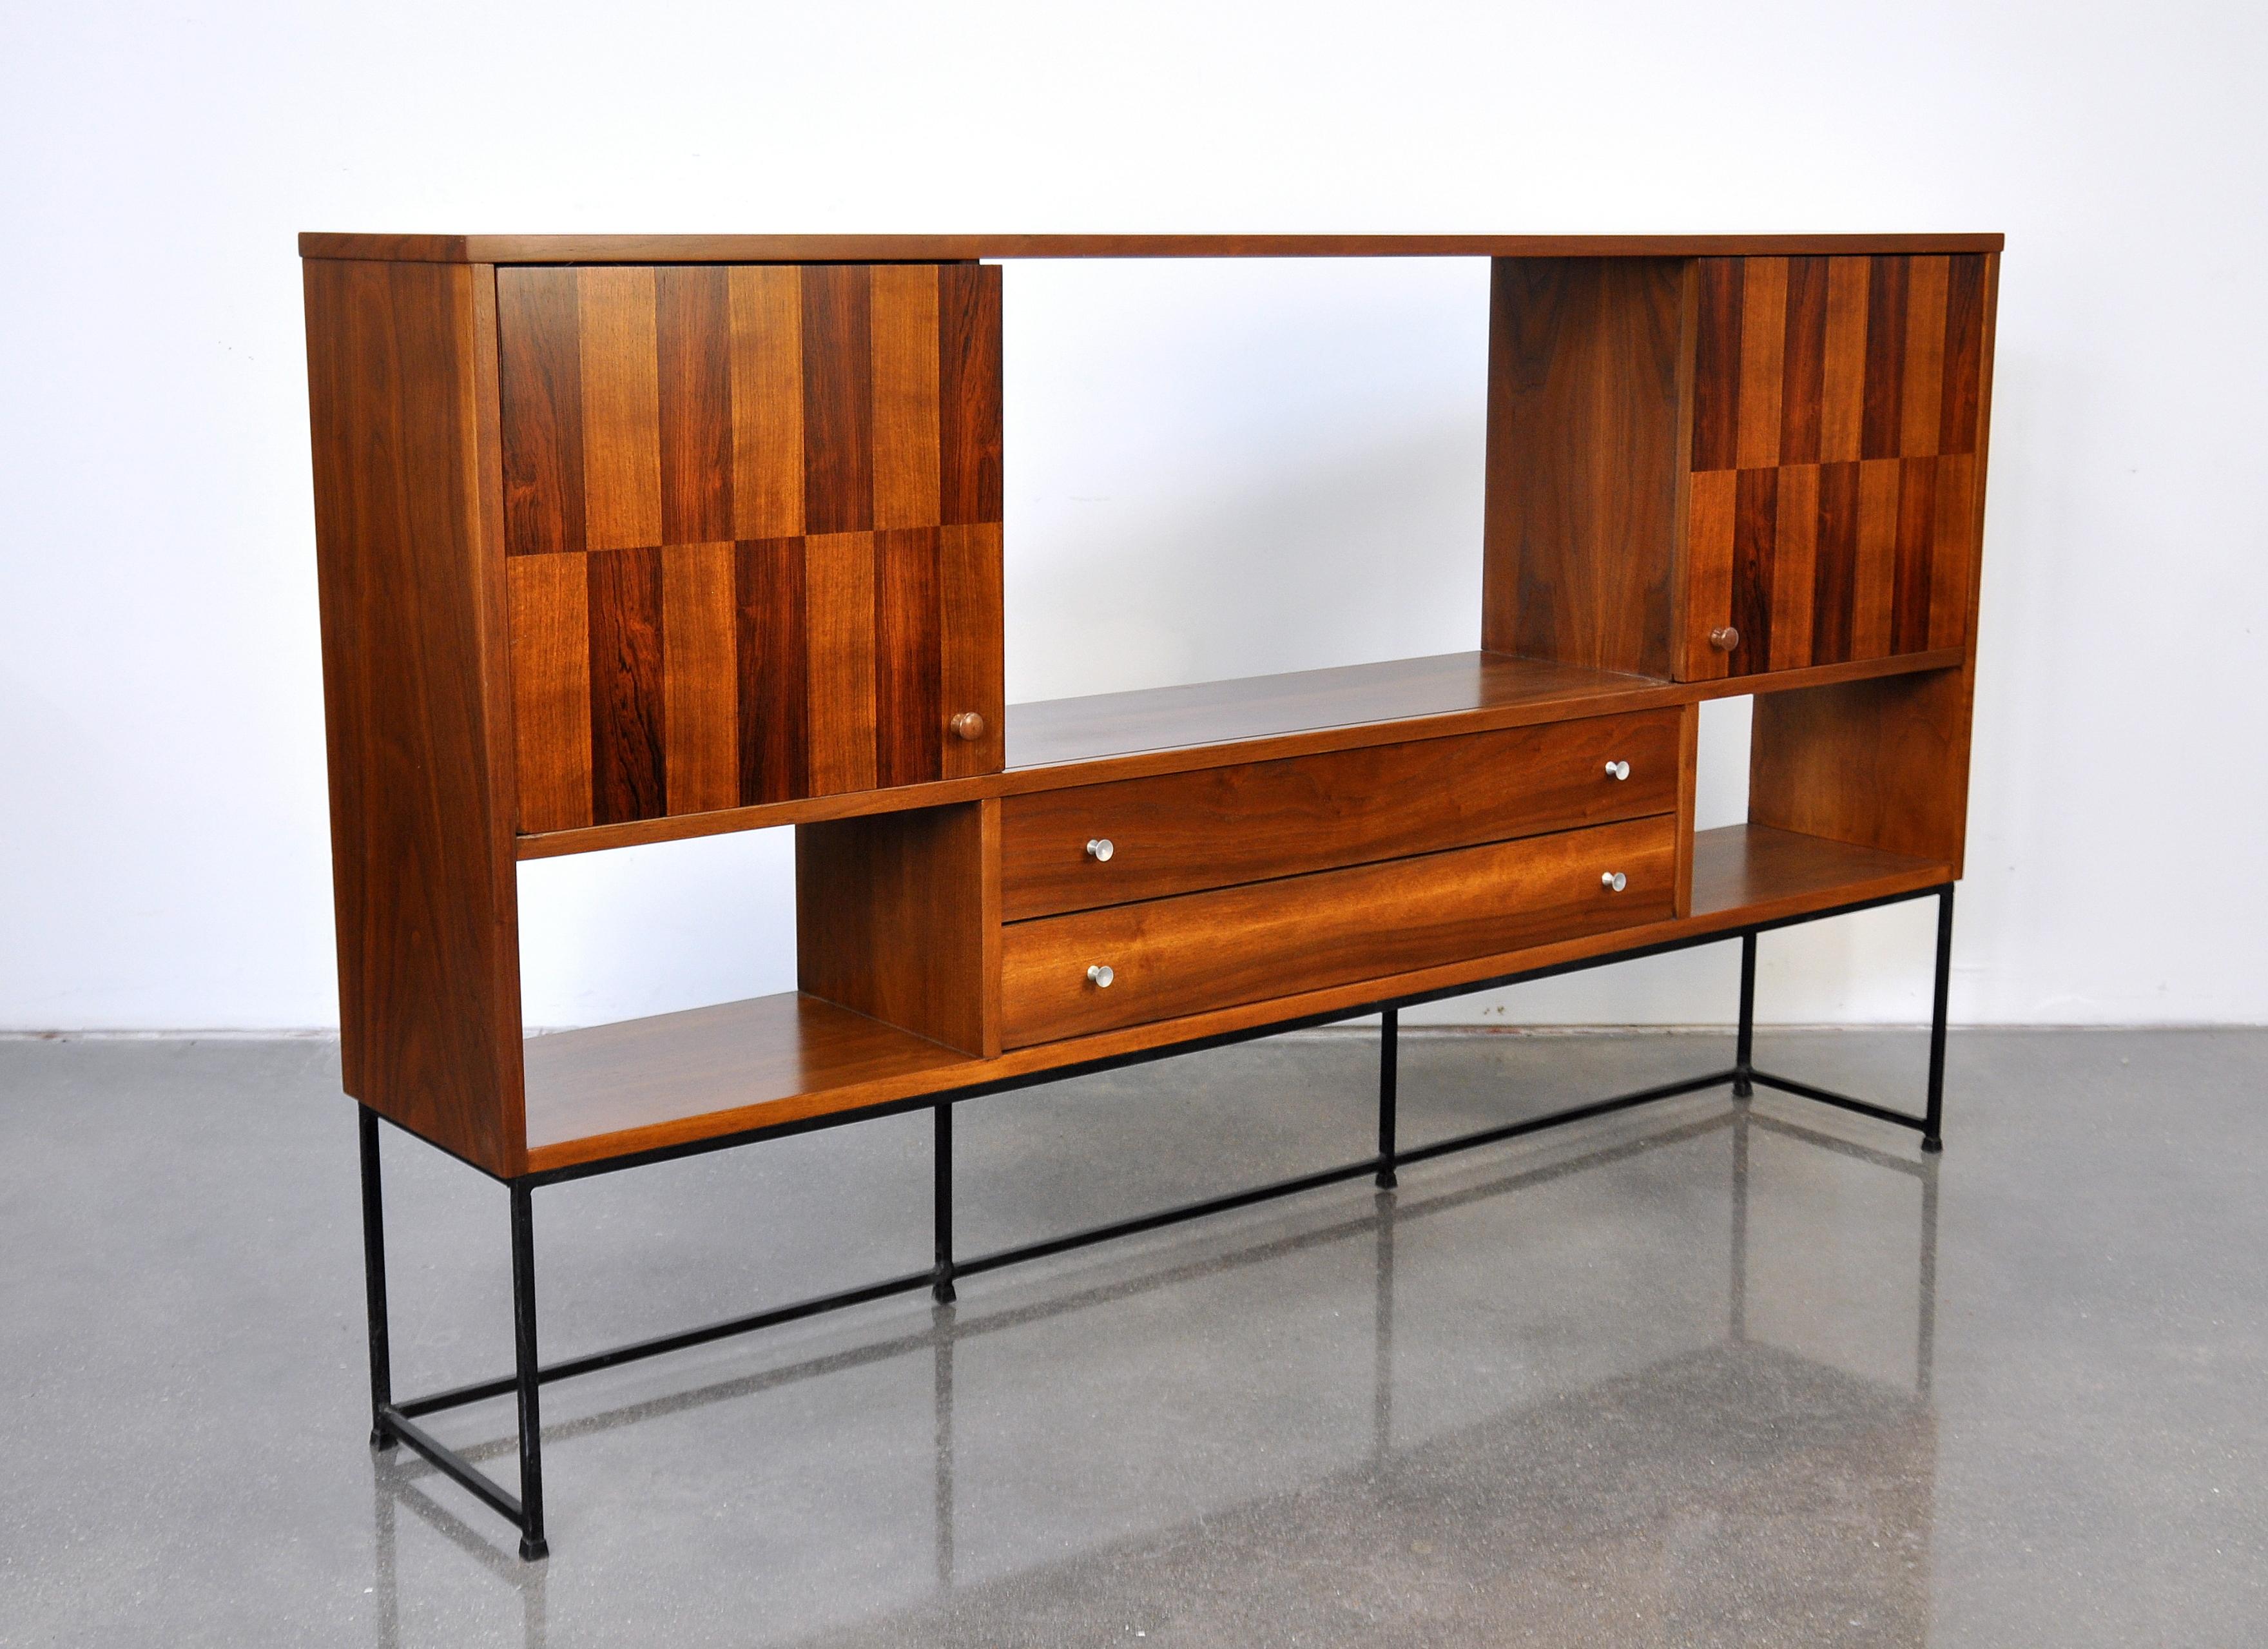 Striking Mid-Century Modern wall unit cabinet from Stanley's Linear Precision Group dating from the mid-1960s. The sideboard features a pair of doors with rosewood checkered inlay that slide to the centre to reveal or close open cabinet spaces, over